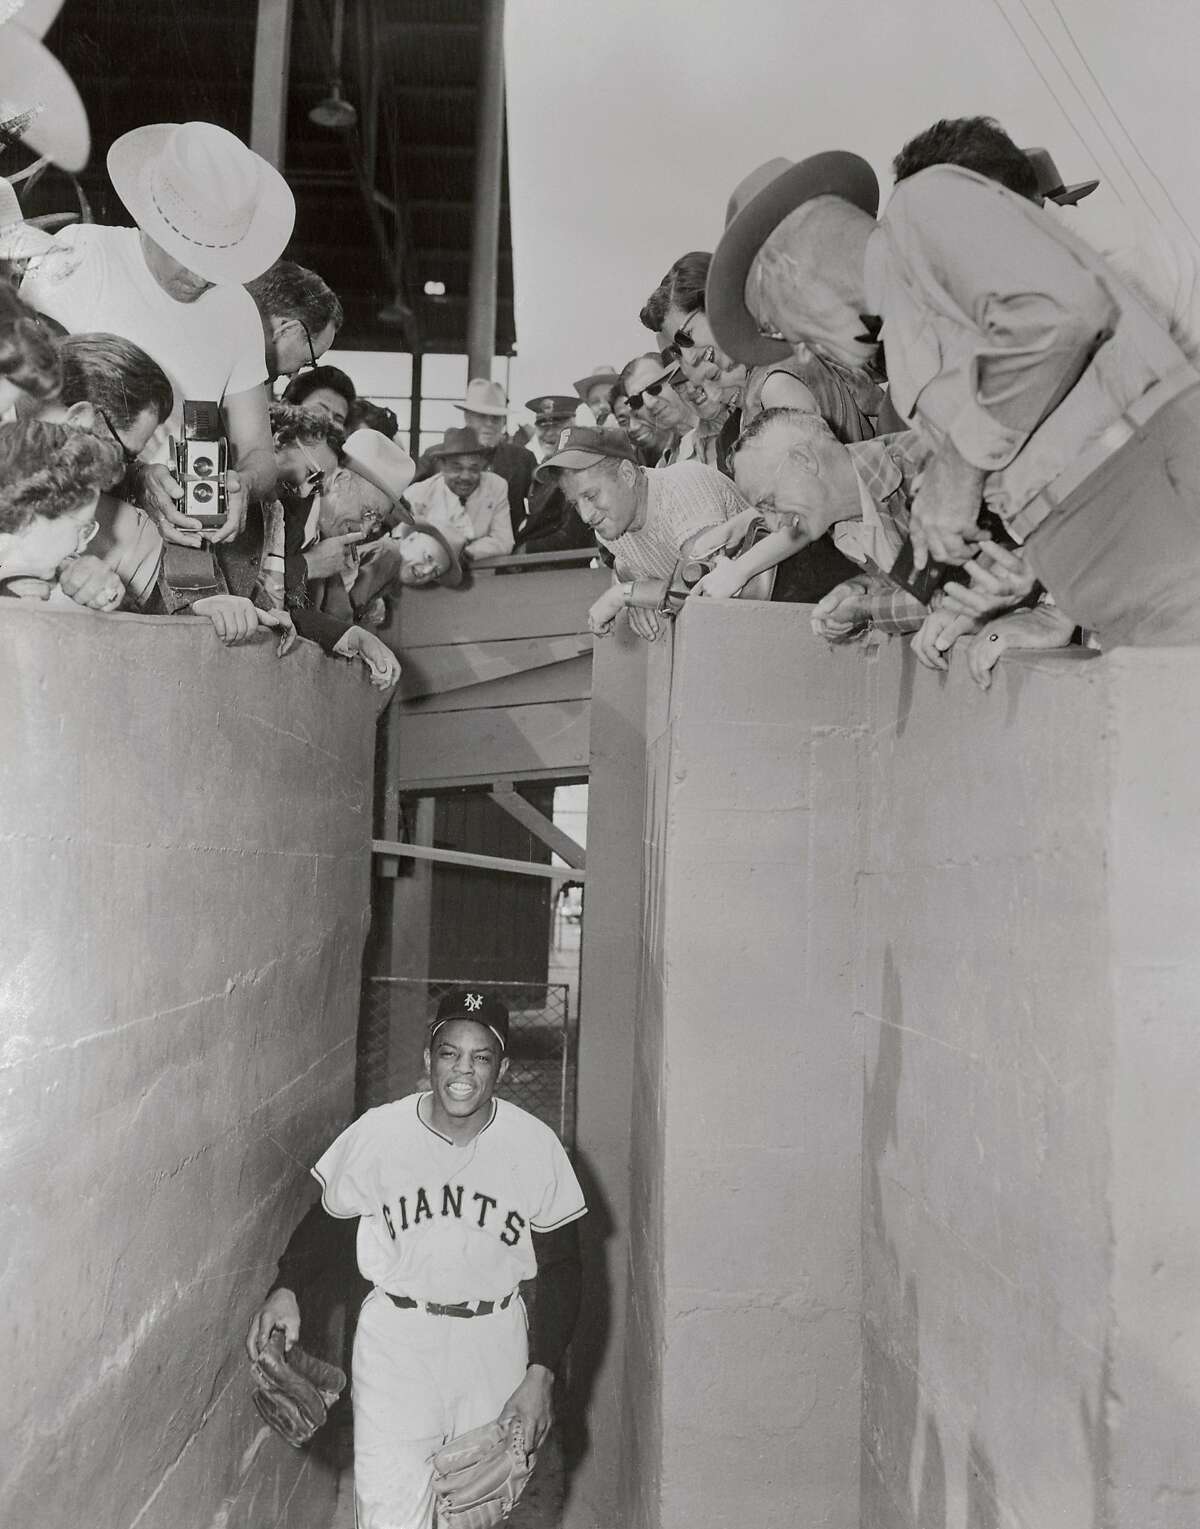 (Original Caption) Fans at New York Giants spring training camp watch Willie Mays as he comes from the locker room in this photo.